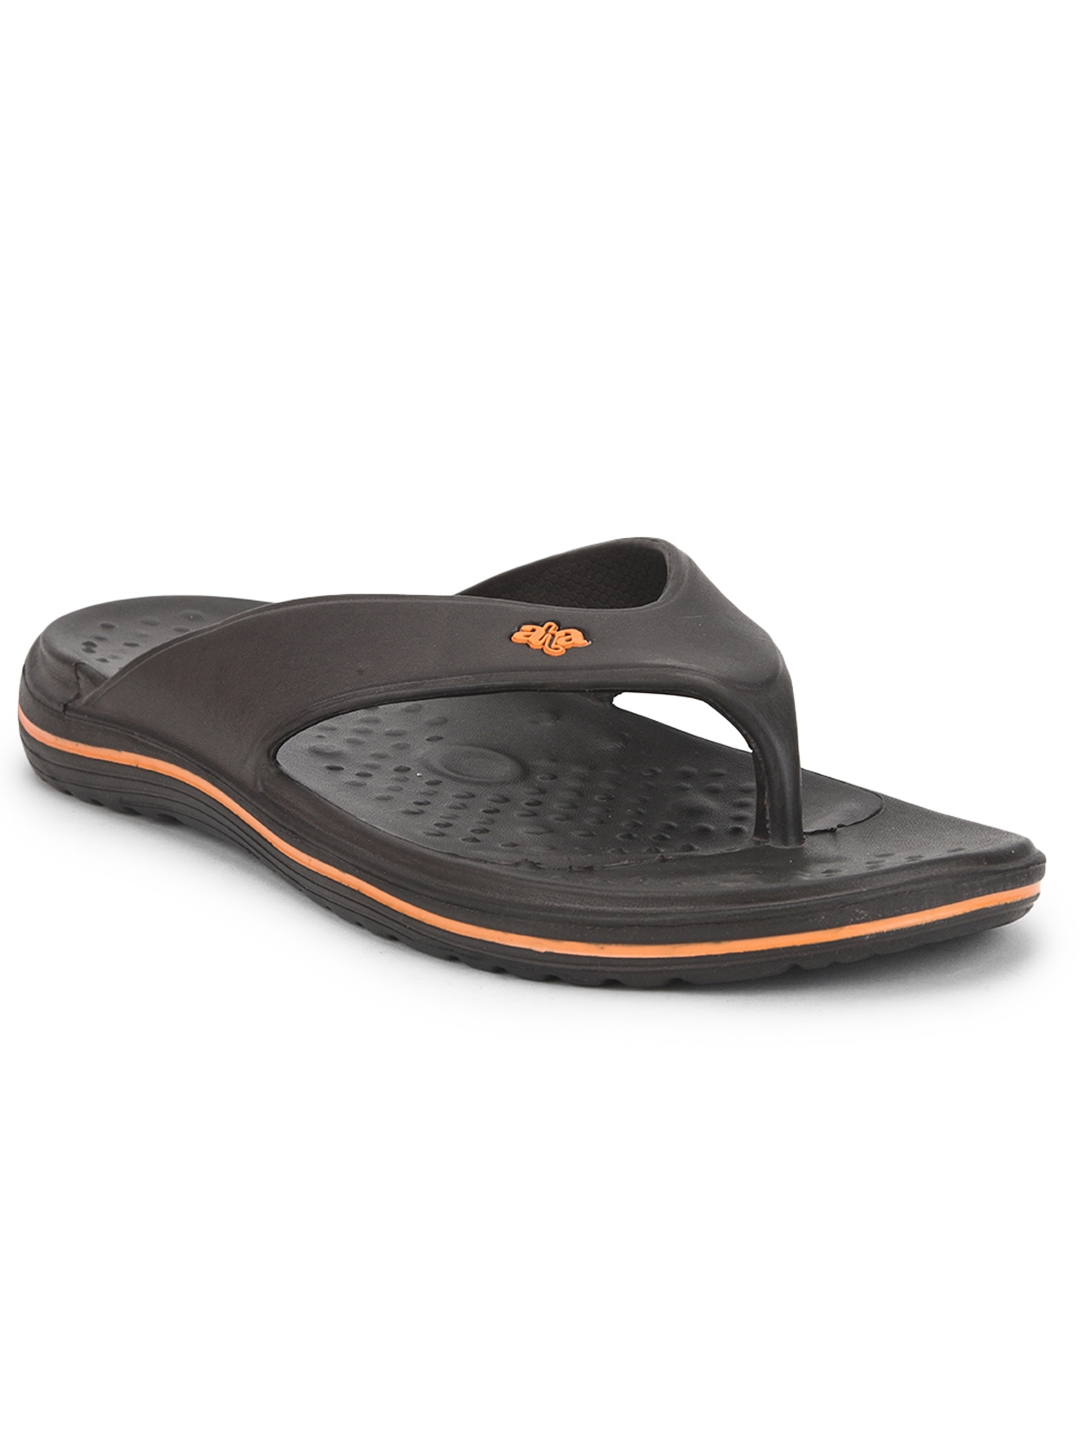 Liberty | A-HA by Liberty Flip Flop BEACHTIME For :- Mens